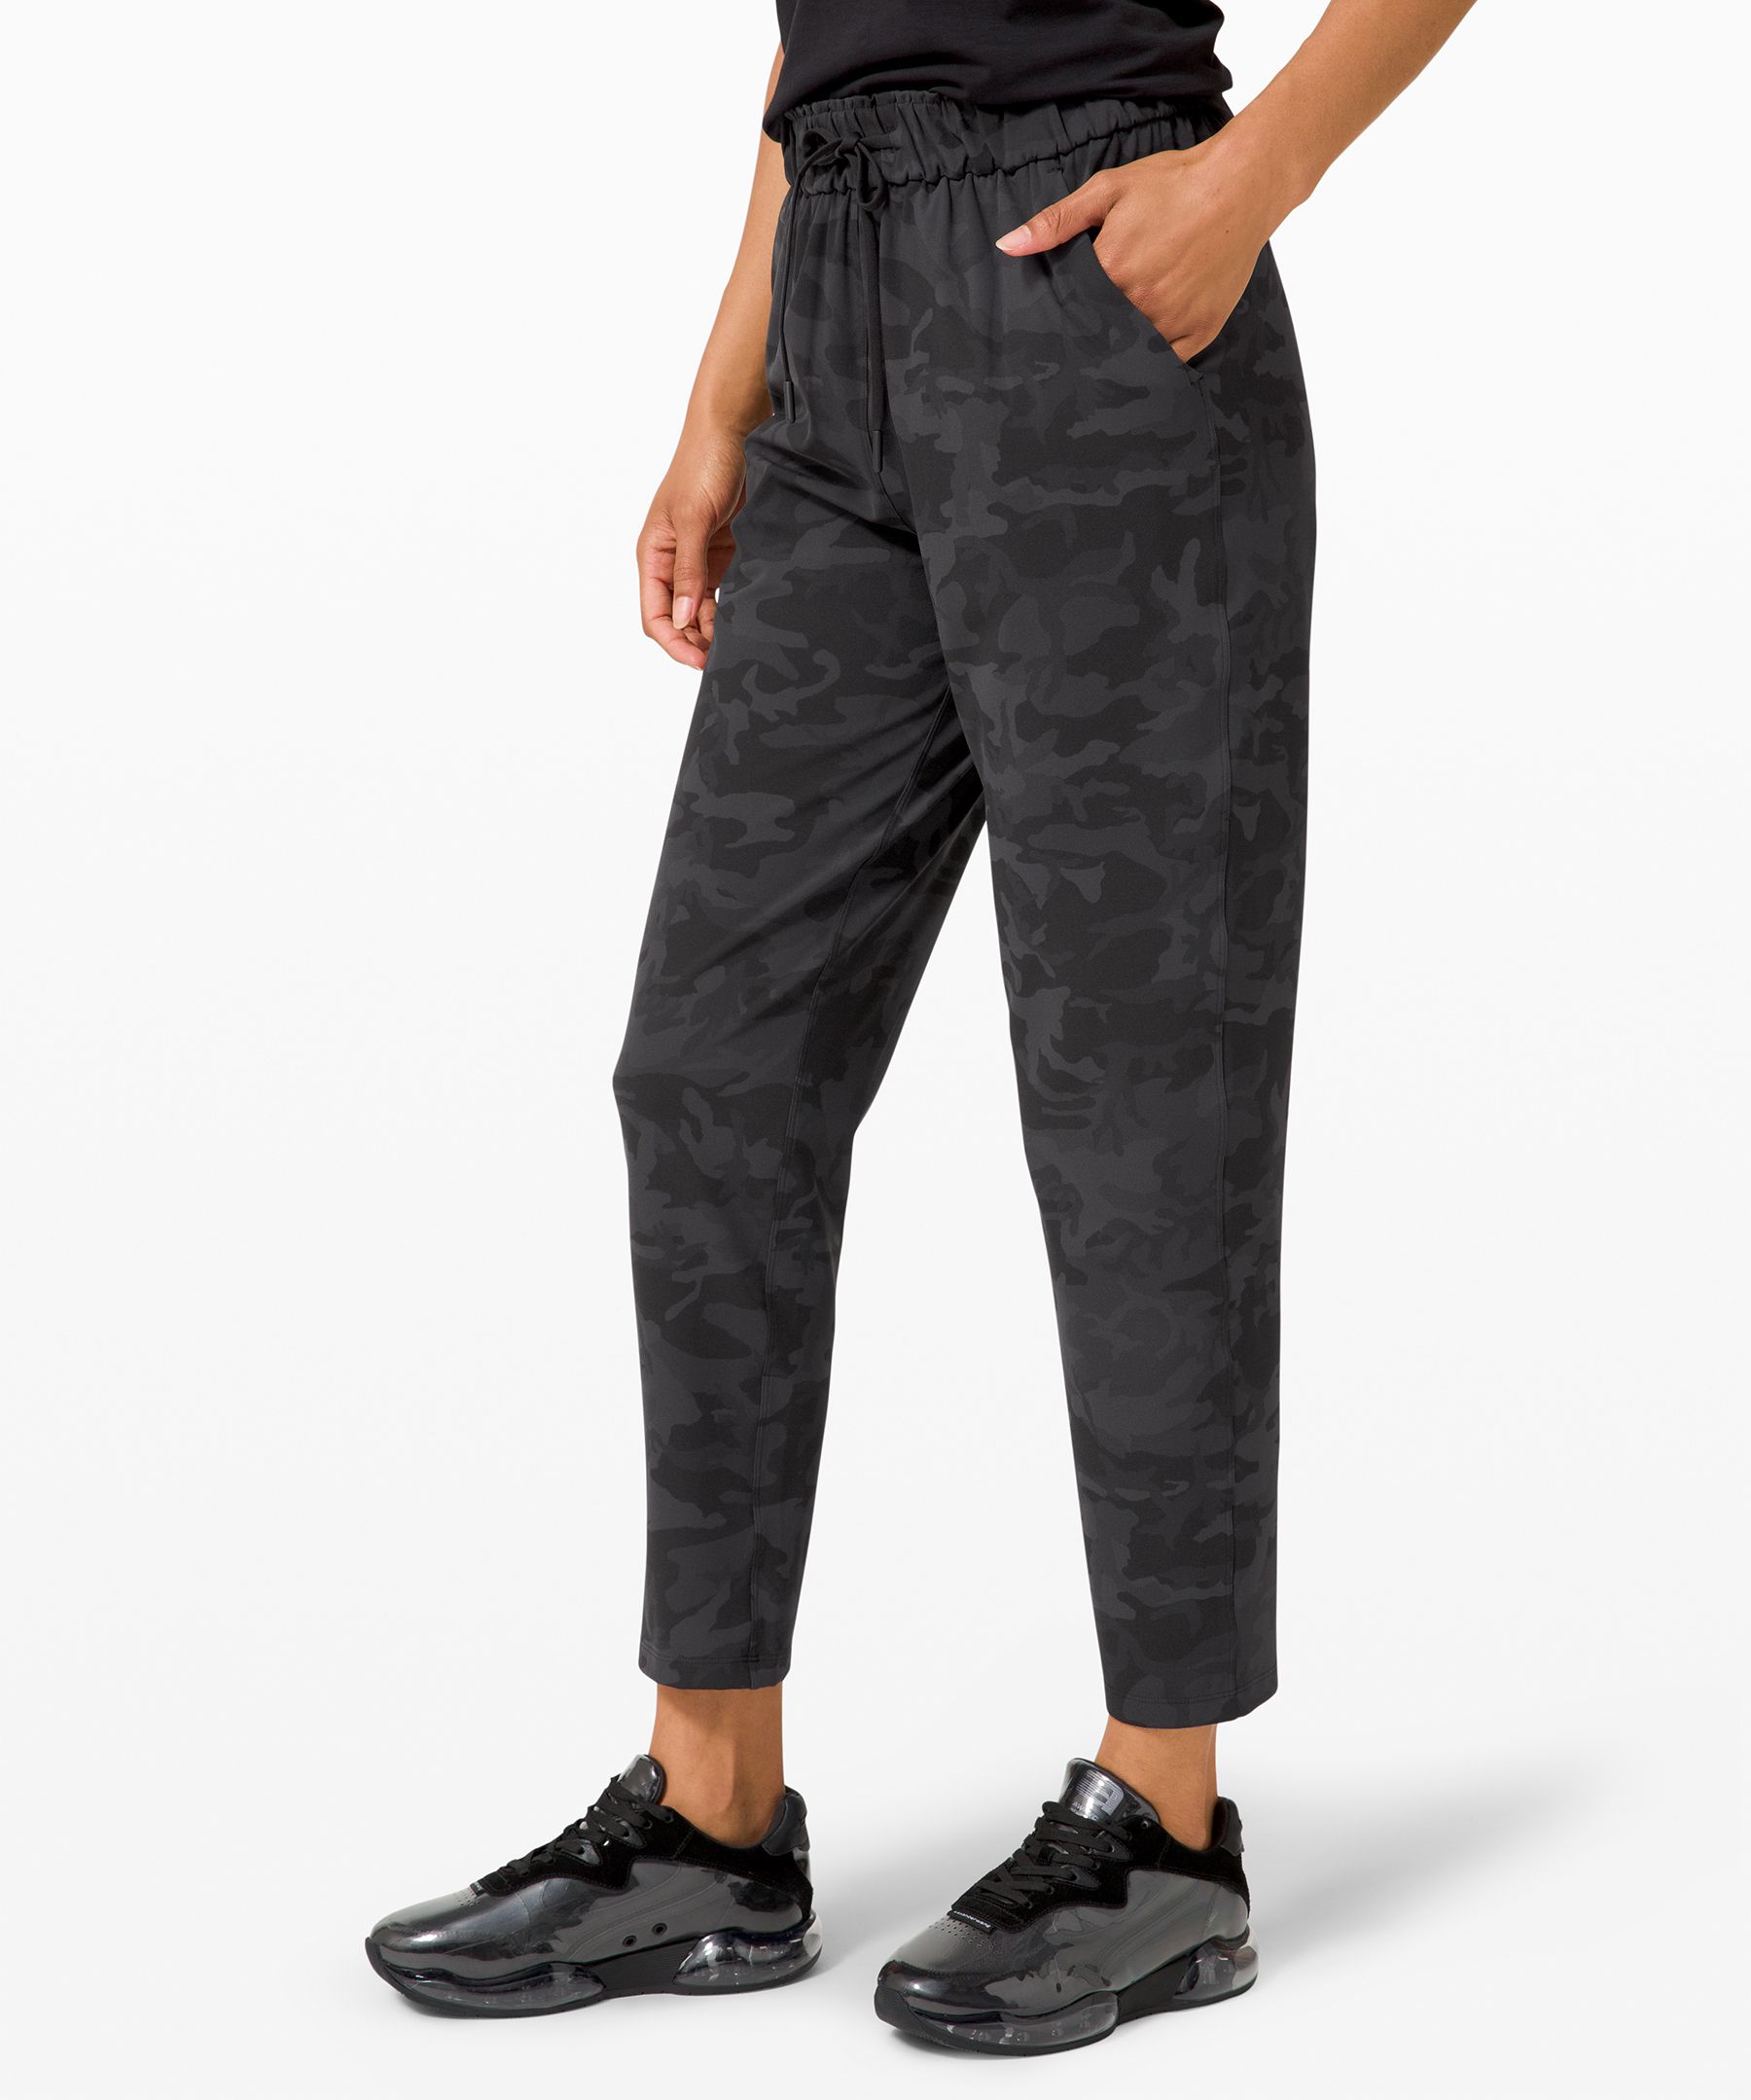 Lululemon Keep Moving Pants 7/8 High-rise In Rosemary Green